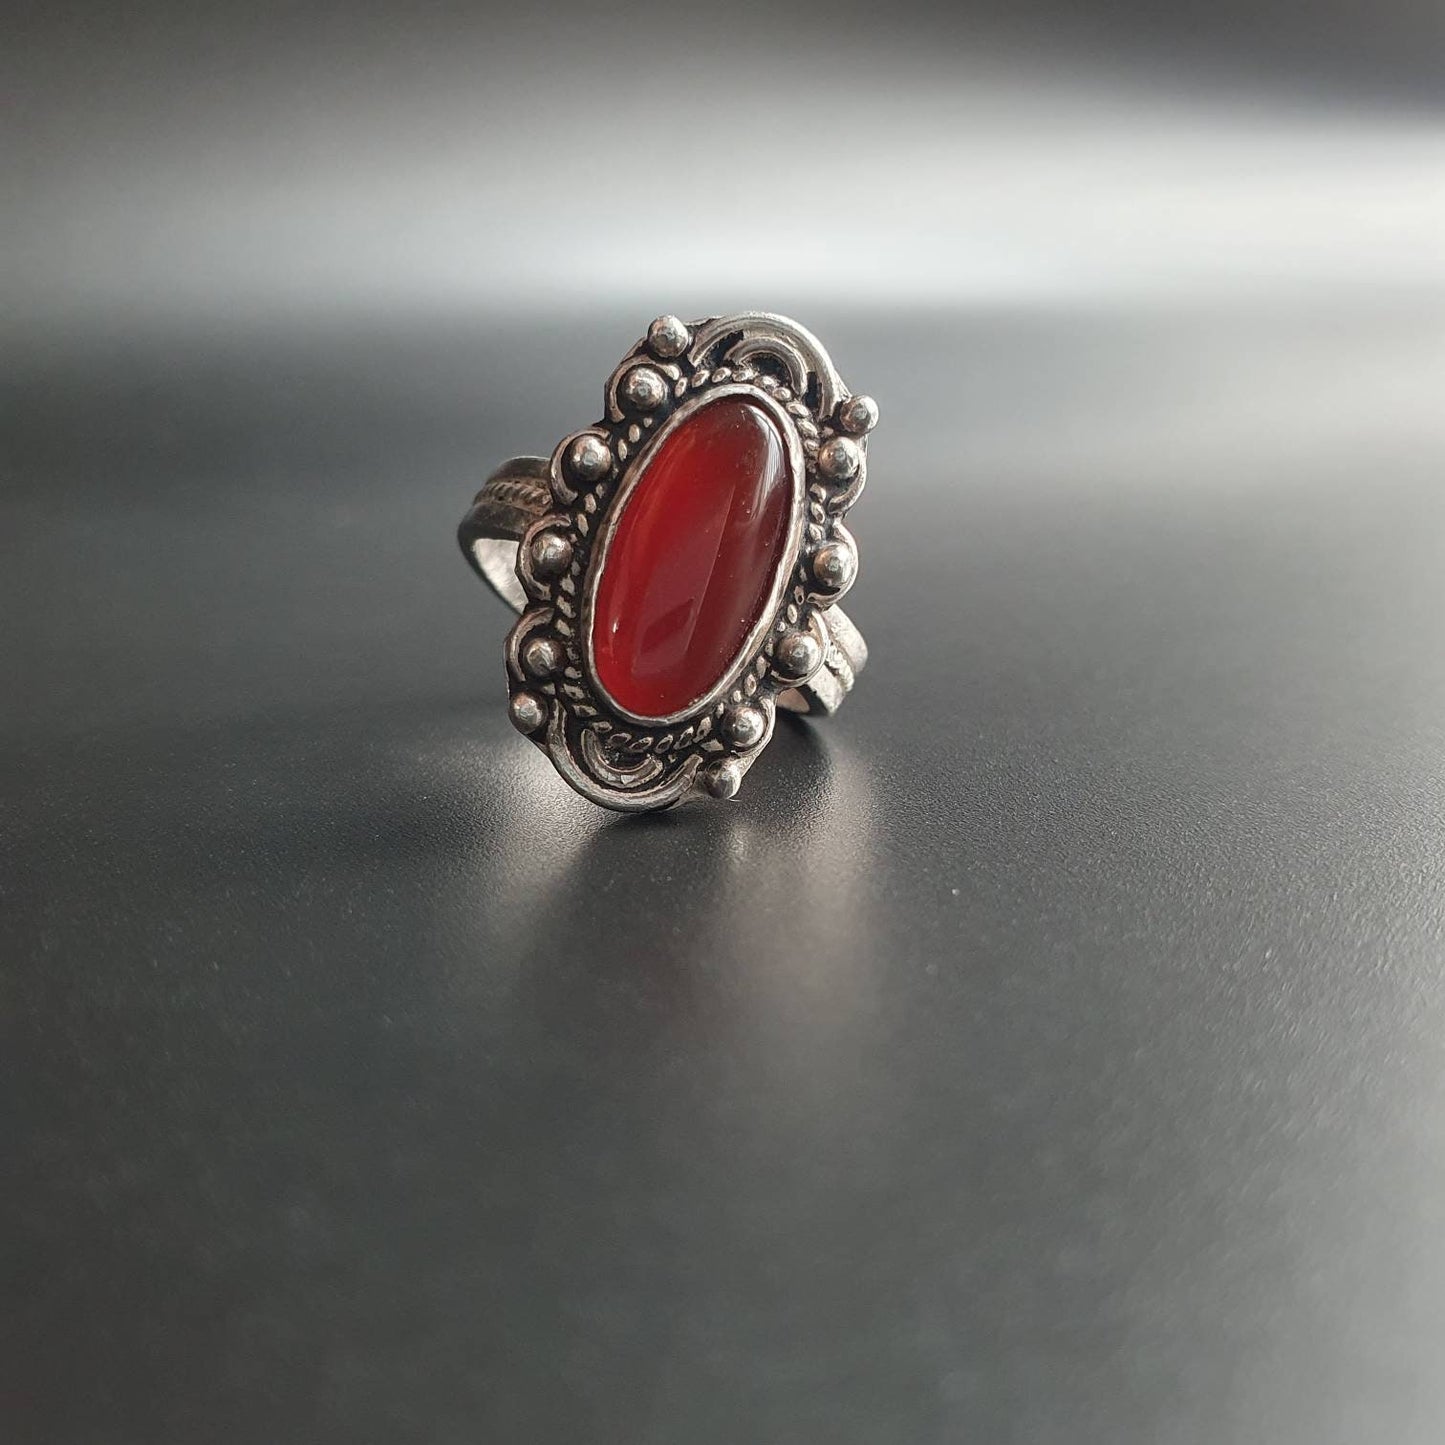 Vintage ring, statement ring, sterling silver ring, carnelian ring, adjustable ring, silver jewellery, gift's, occasions, gothic ring